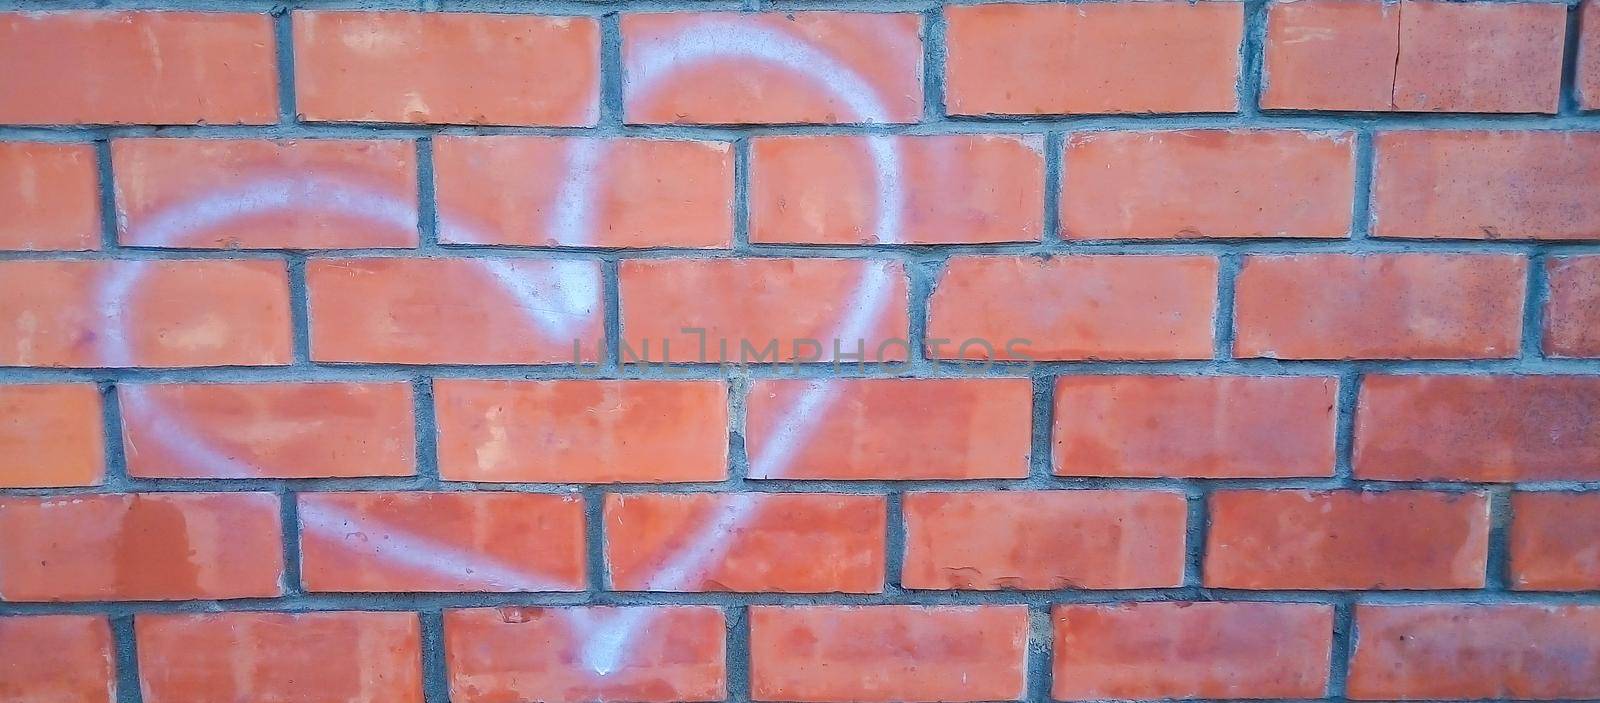 Red brick wall with white heart-shaped outlines by lapushka62